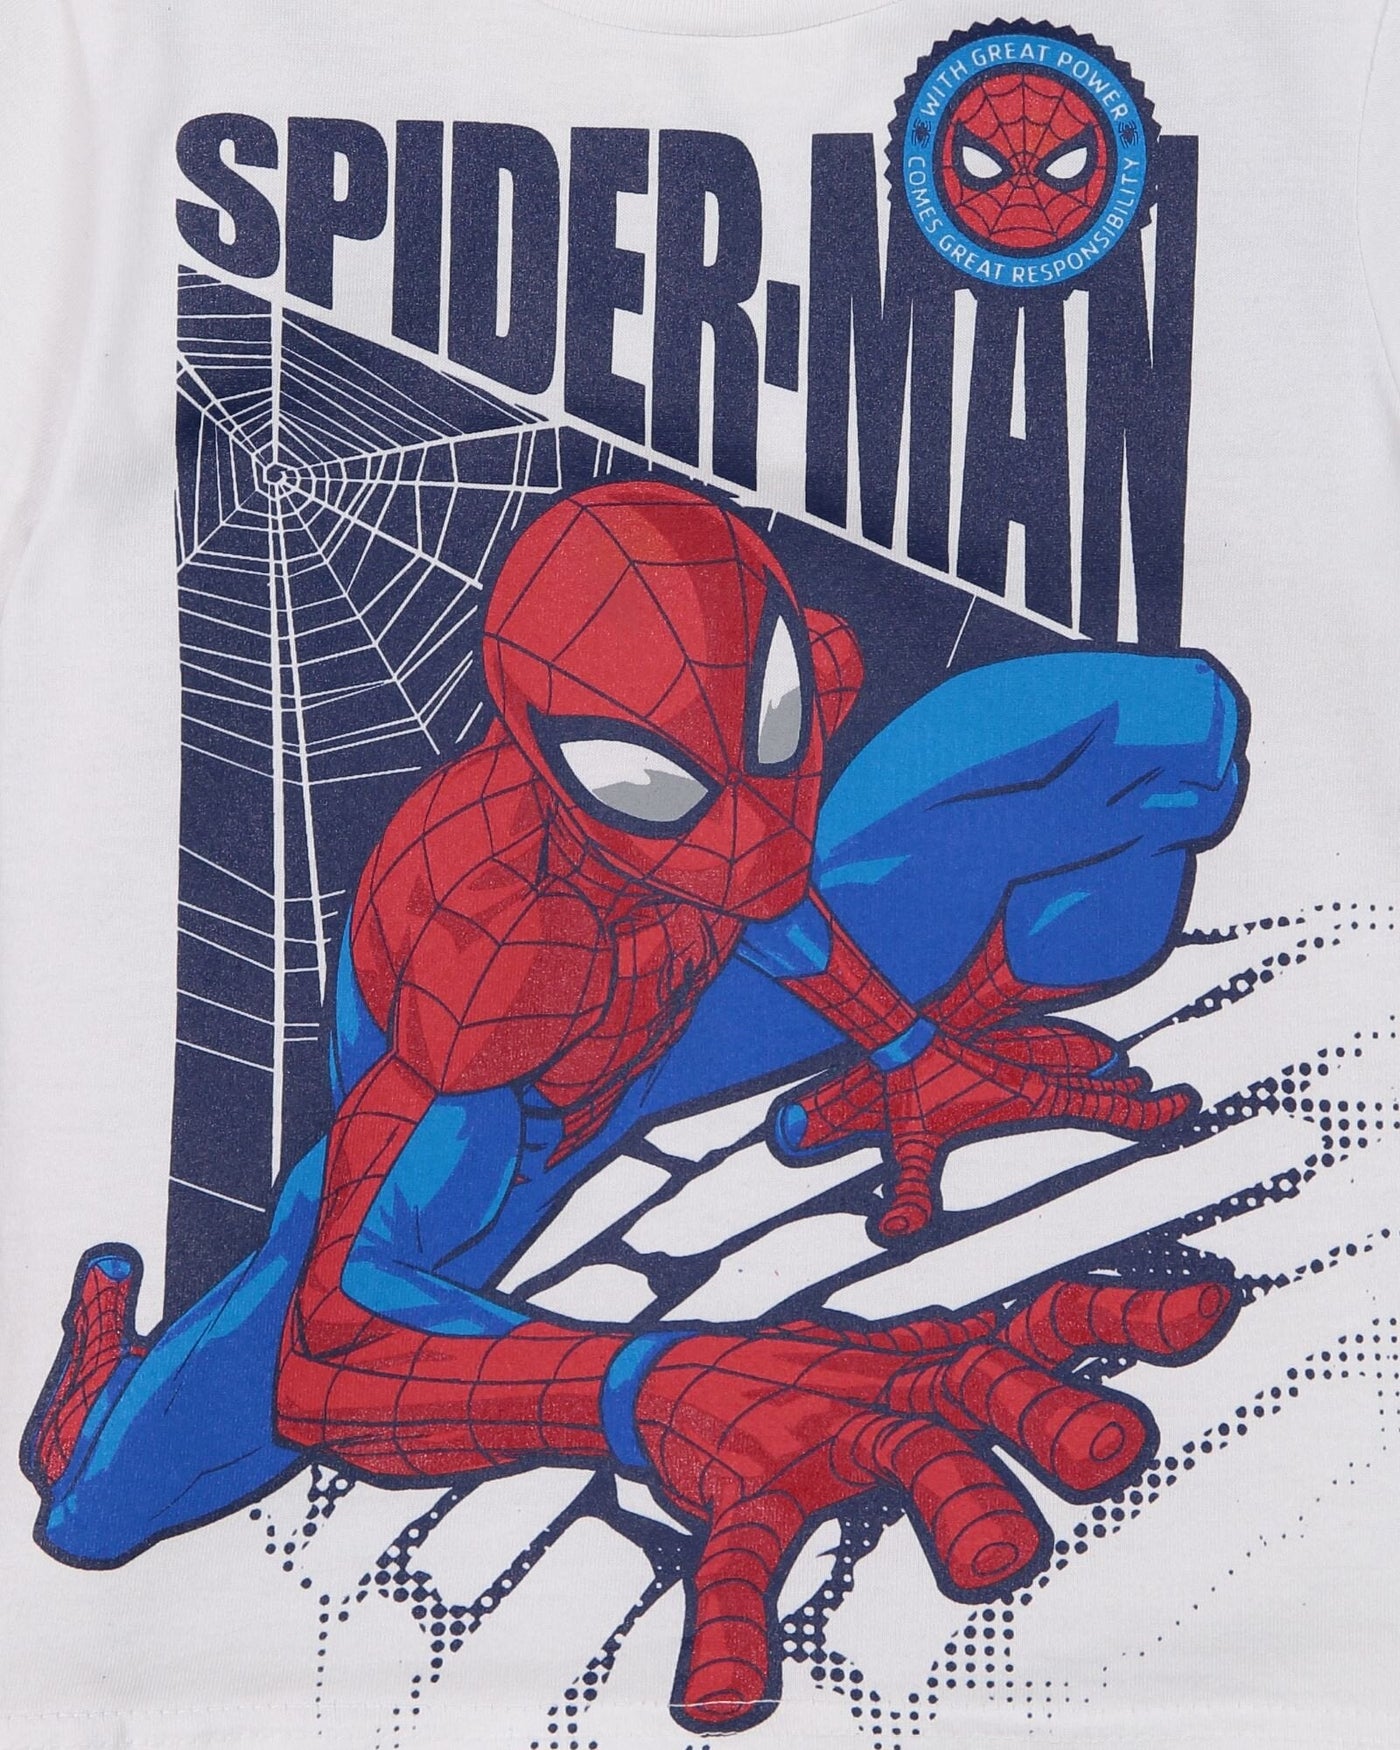 Marvel Spider - Man T - Shirt and French Terry Shorts Outfit Set - imagikids